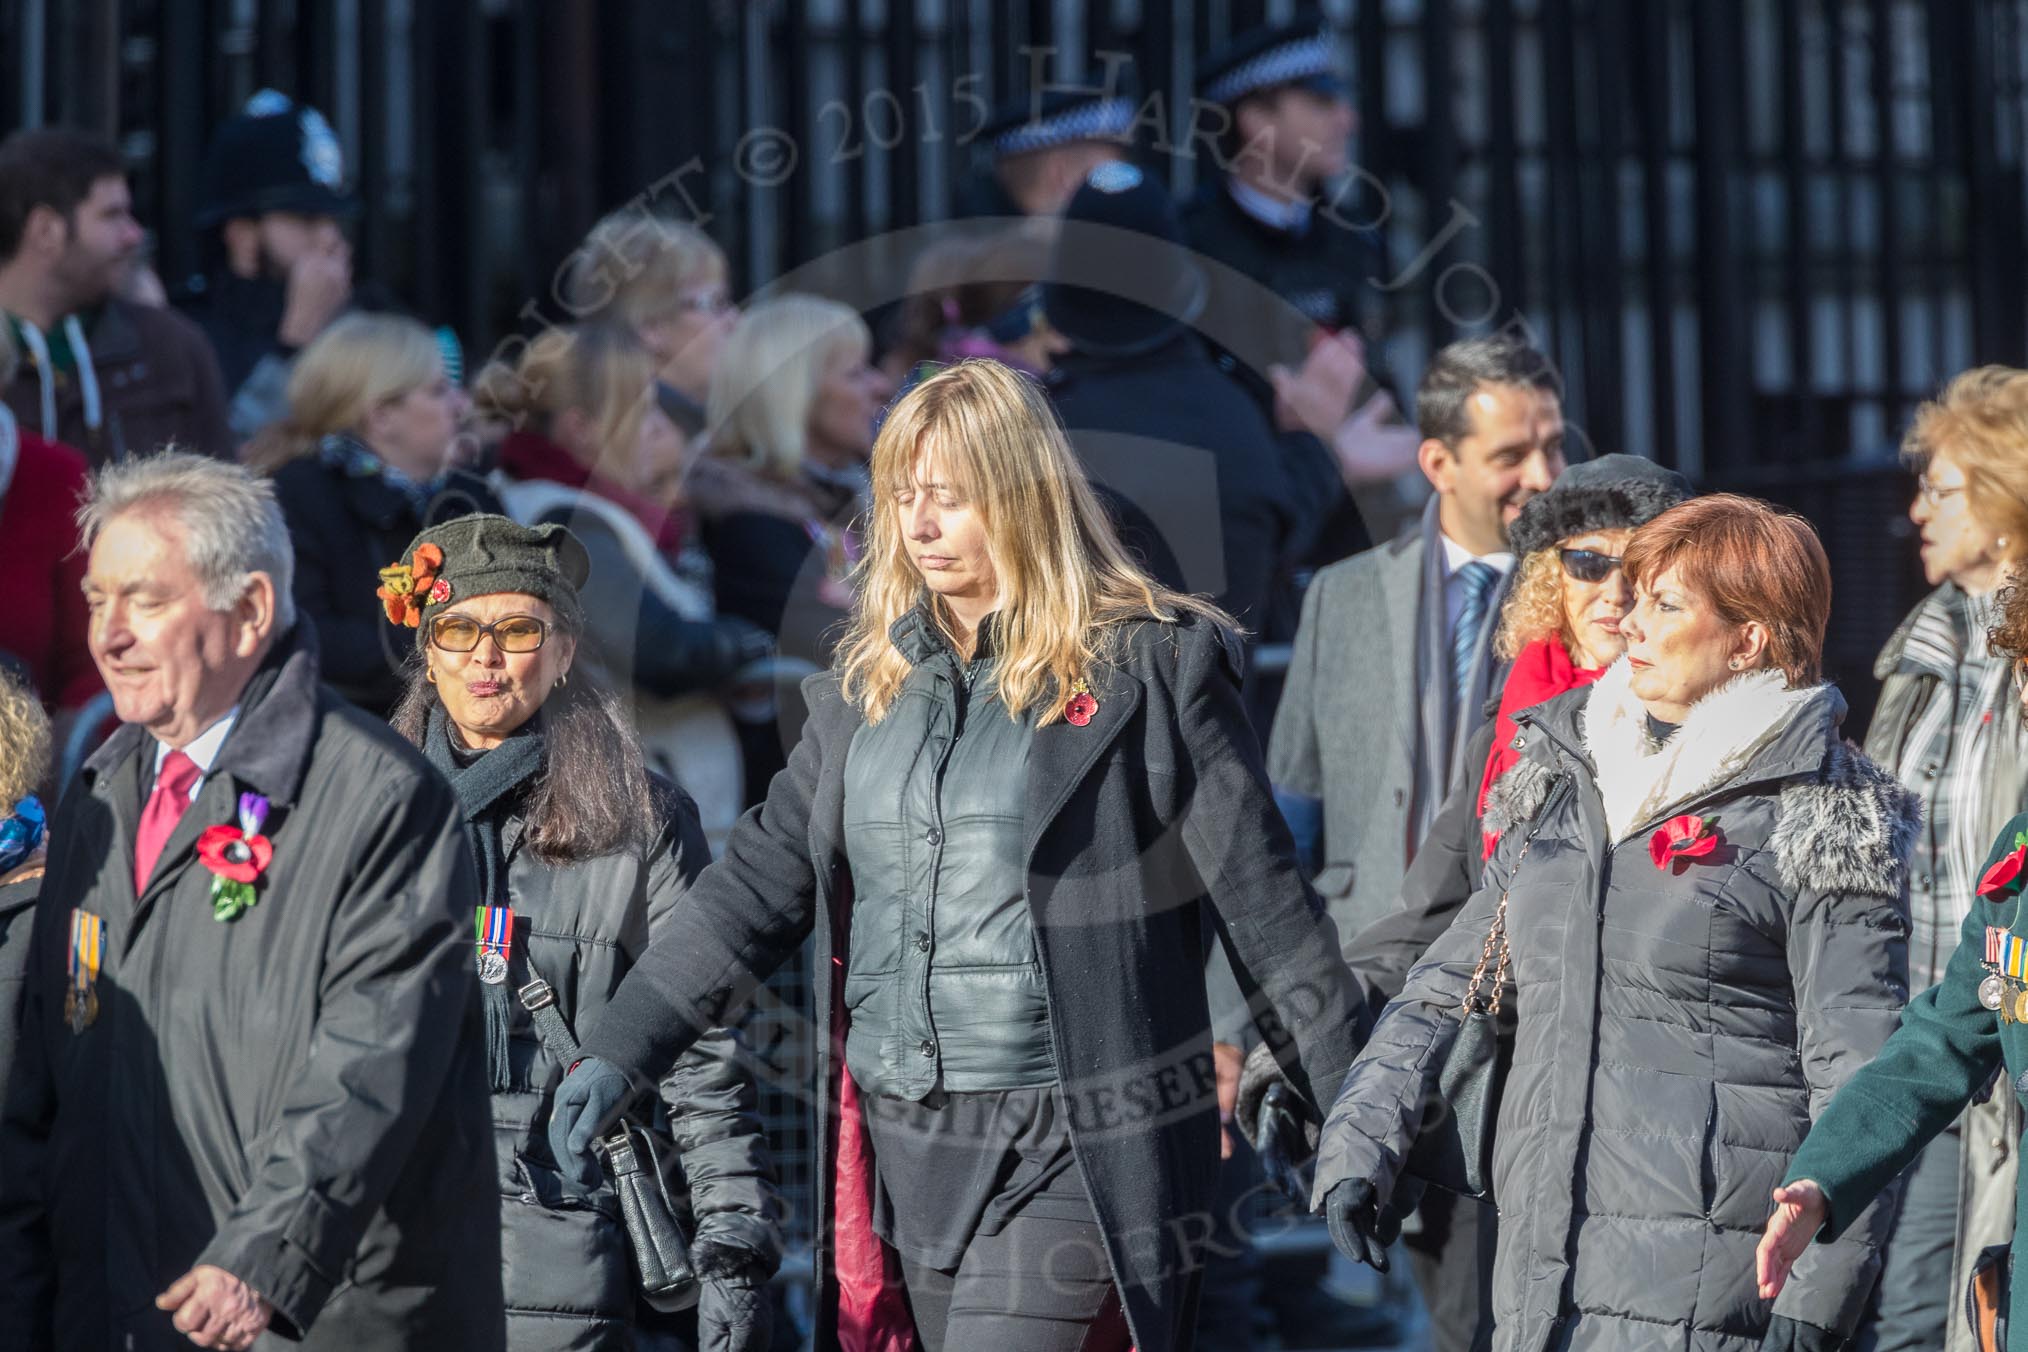 March Past, Remembrance Sunday at the Cenotaph 2016: M30 Equity.
Cenotaph, Whitehall, London SW1,
London,
Greater London,
United Kingdom,
on 13 November 2016 at 13:17, image #2764